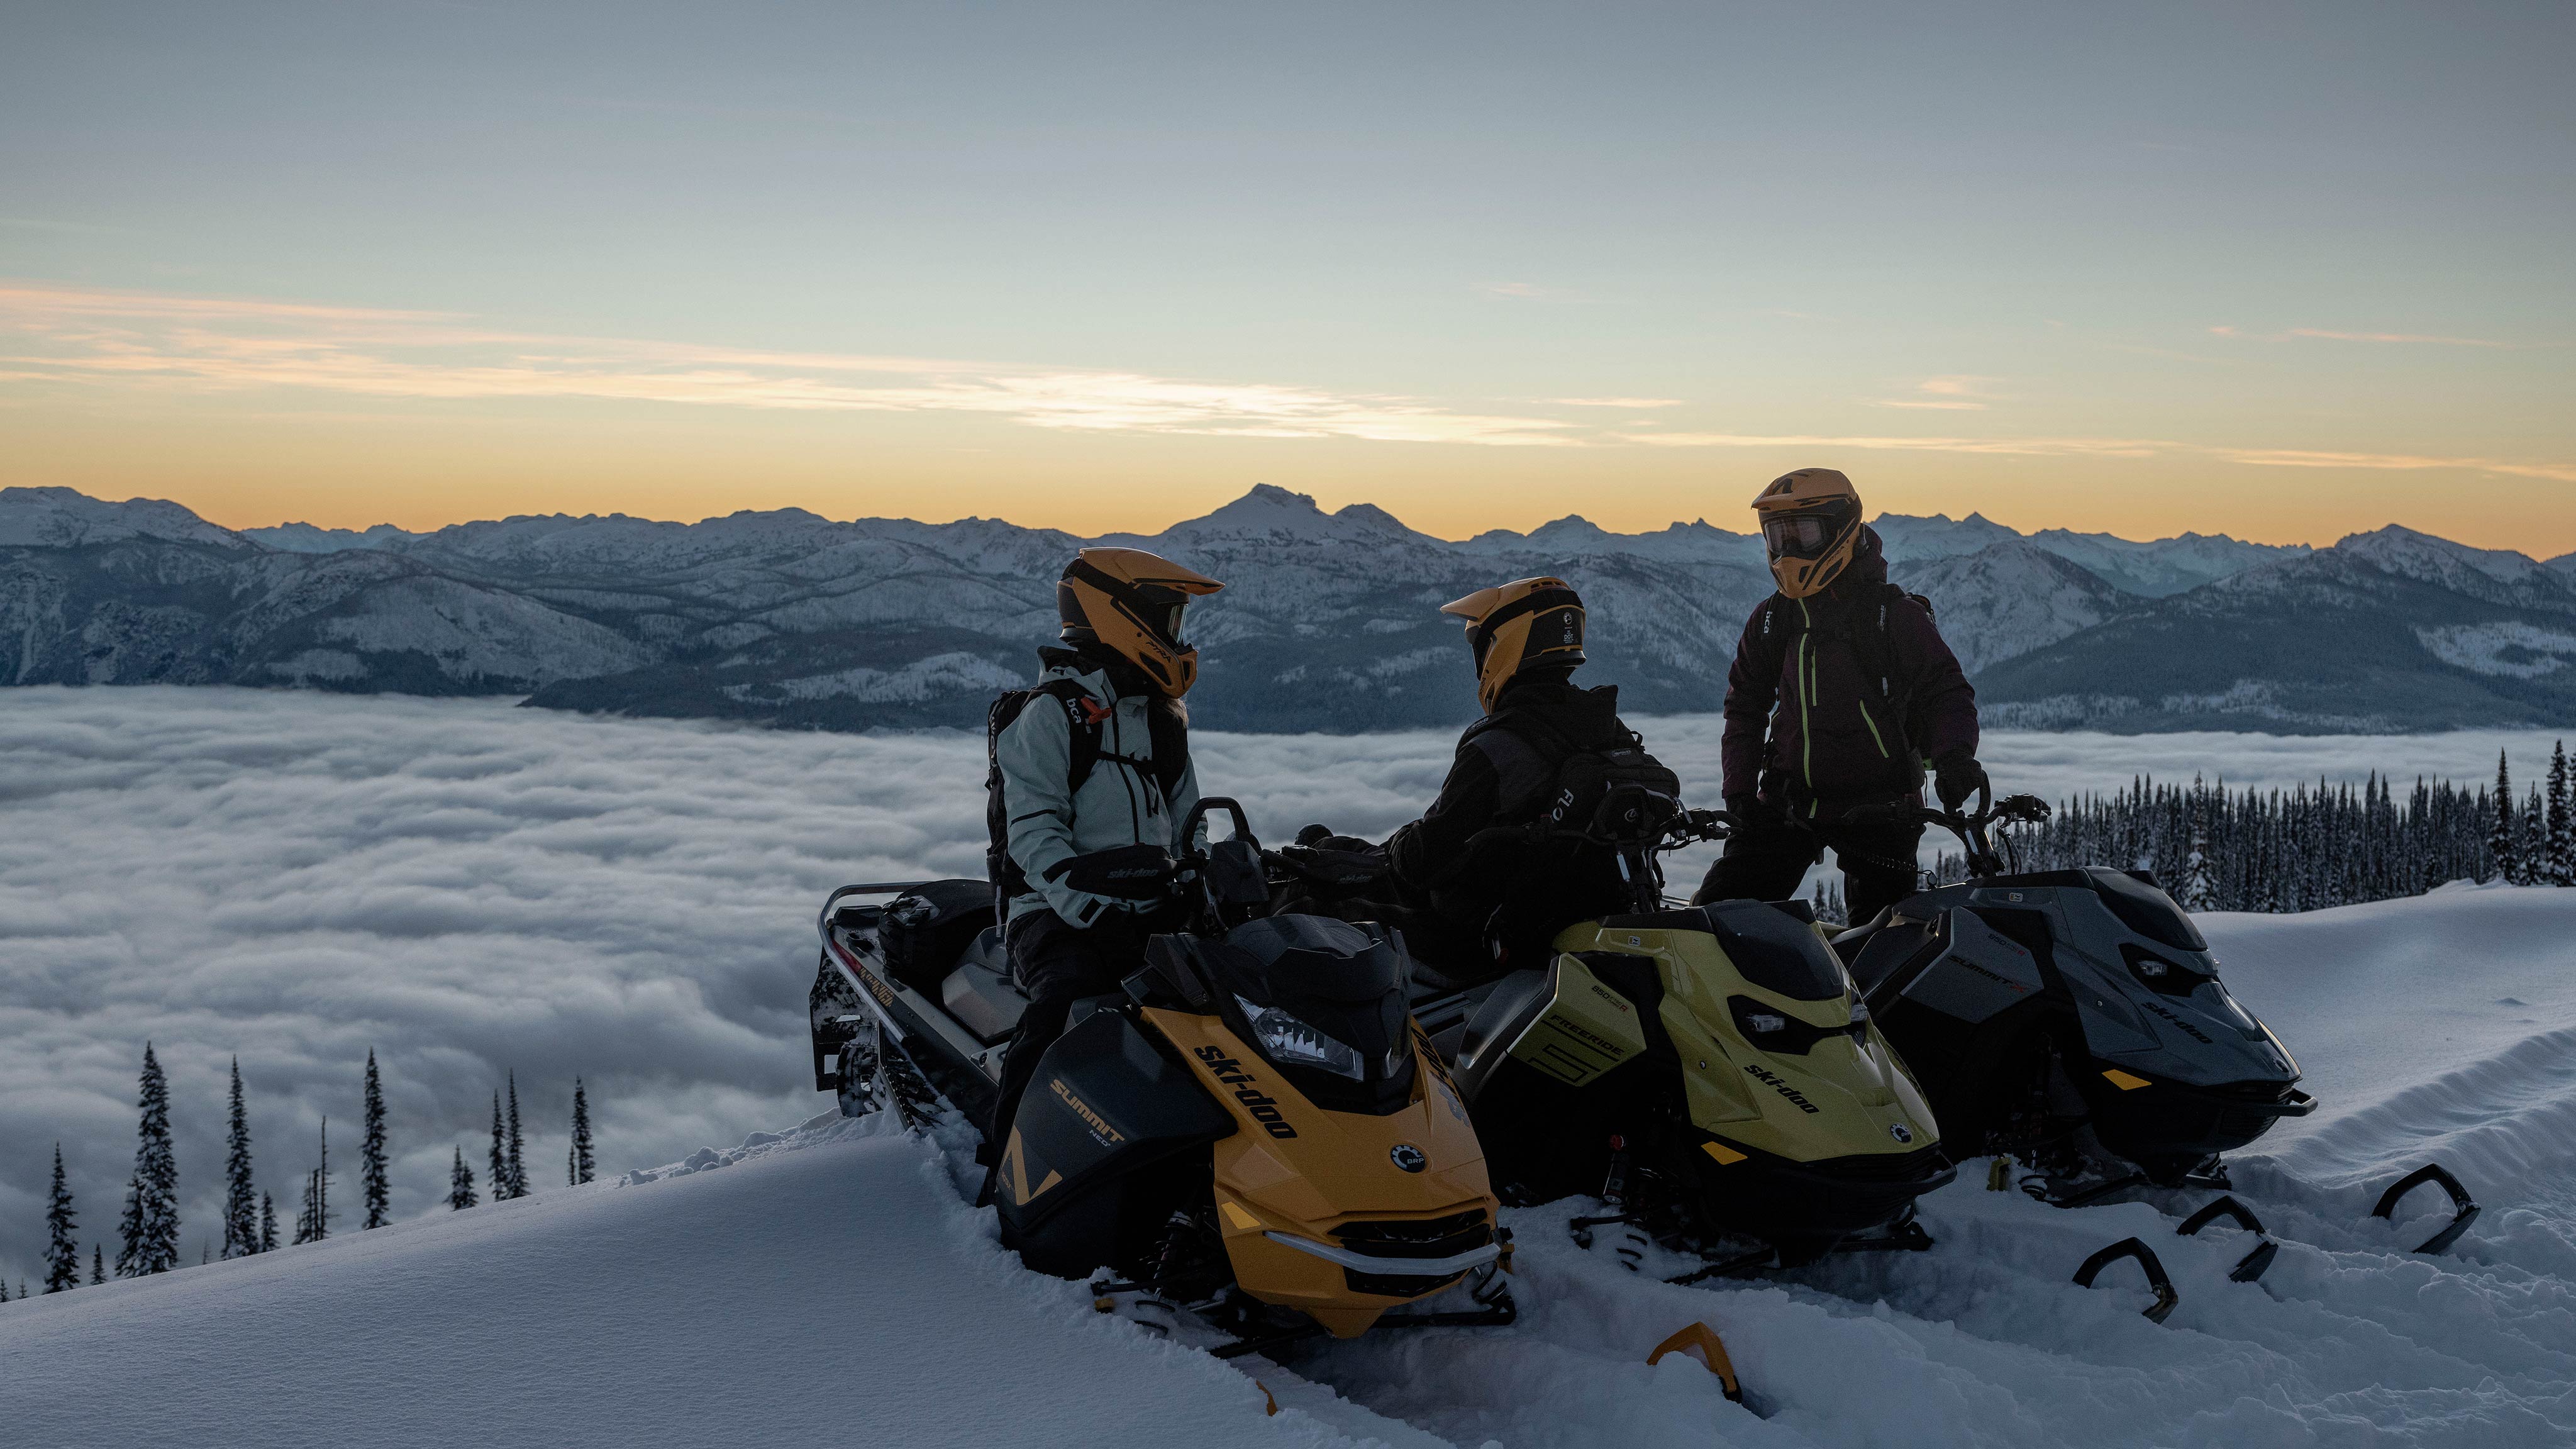 Three Ski-Doo riders on their sled at the top of a mountain